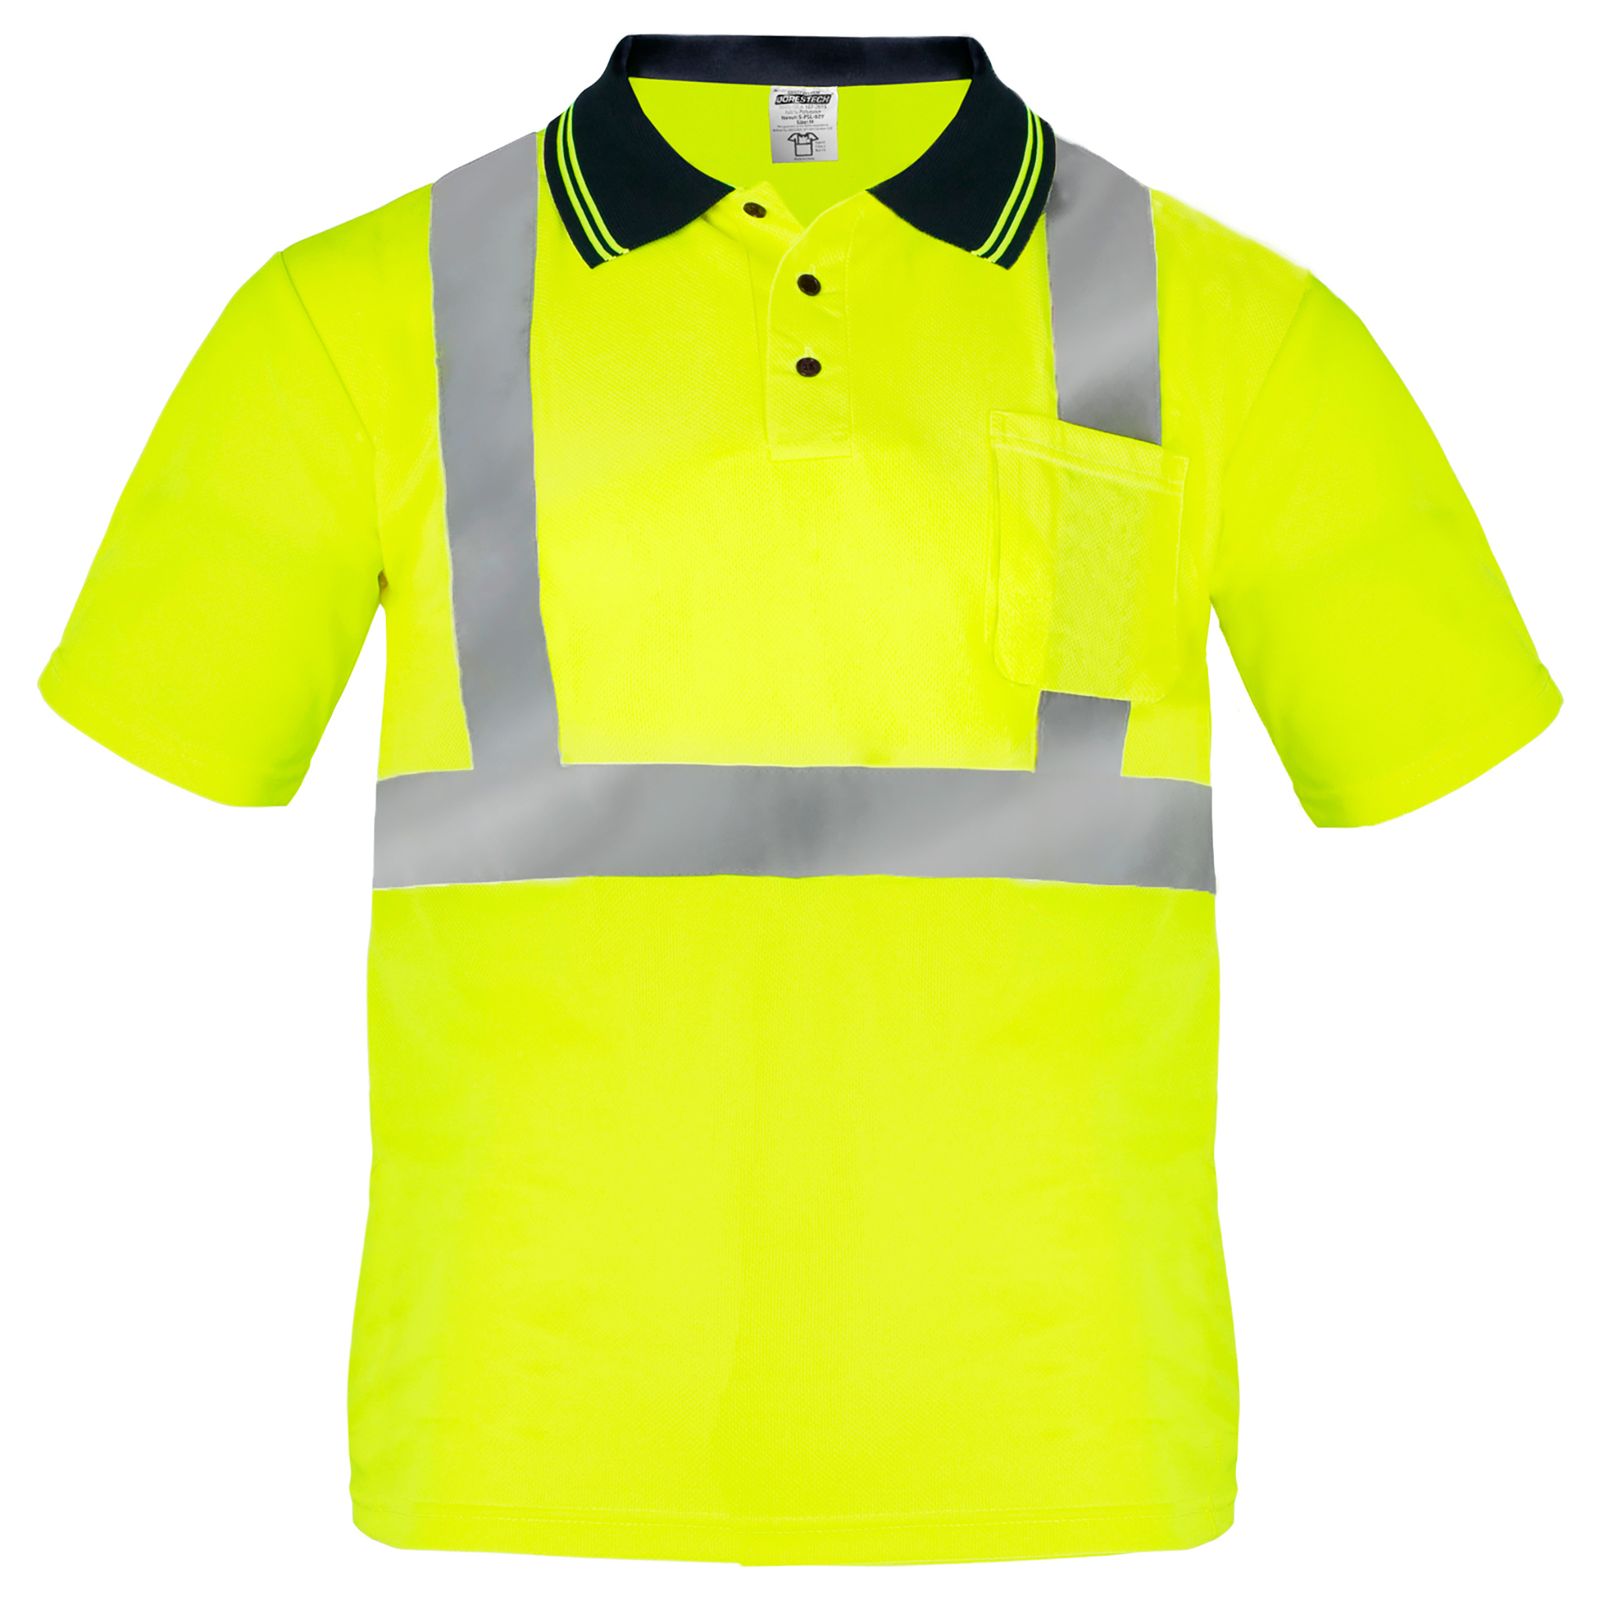 Yellow reflective safety polo shirt  Short sleeve polo shirt with chest pocket